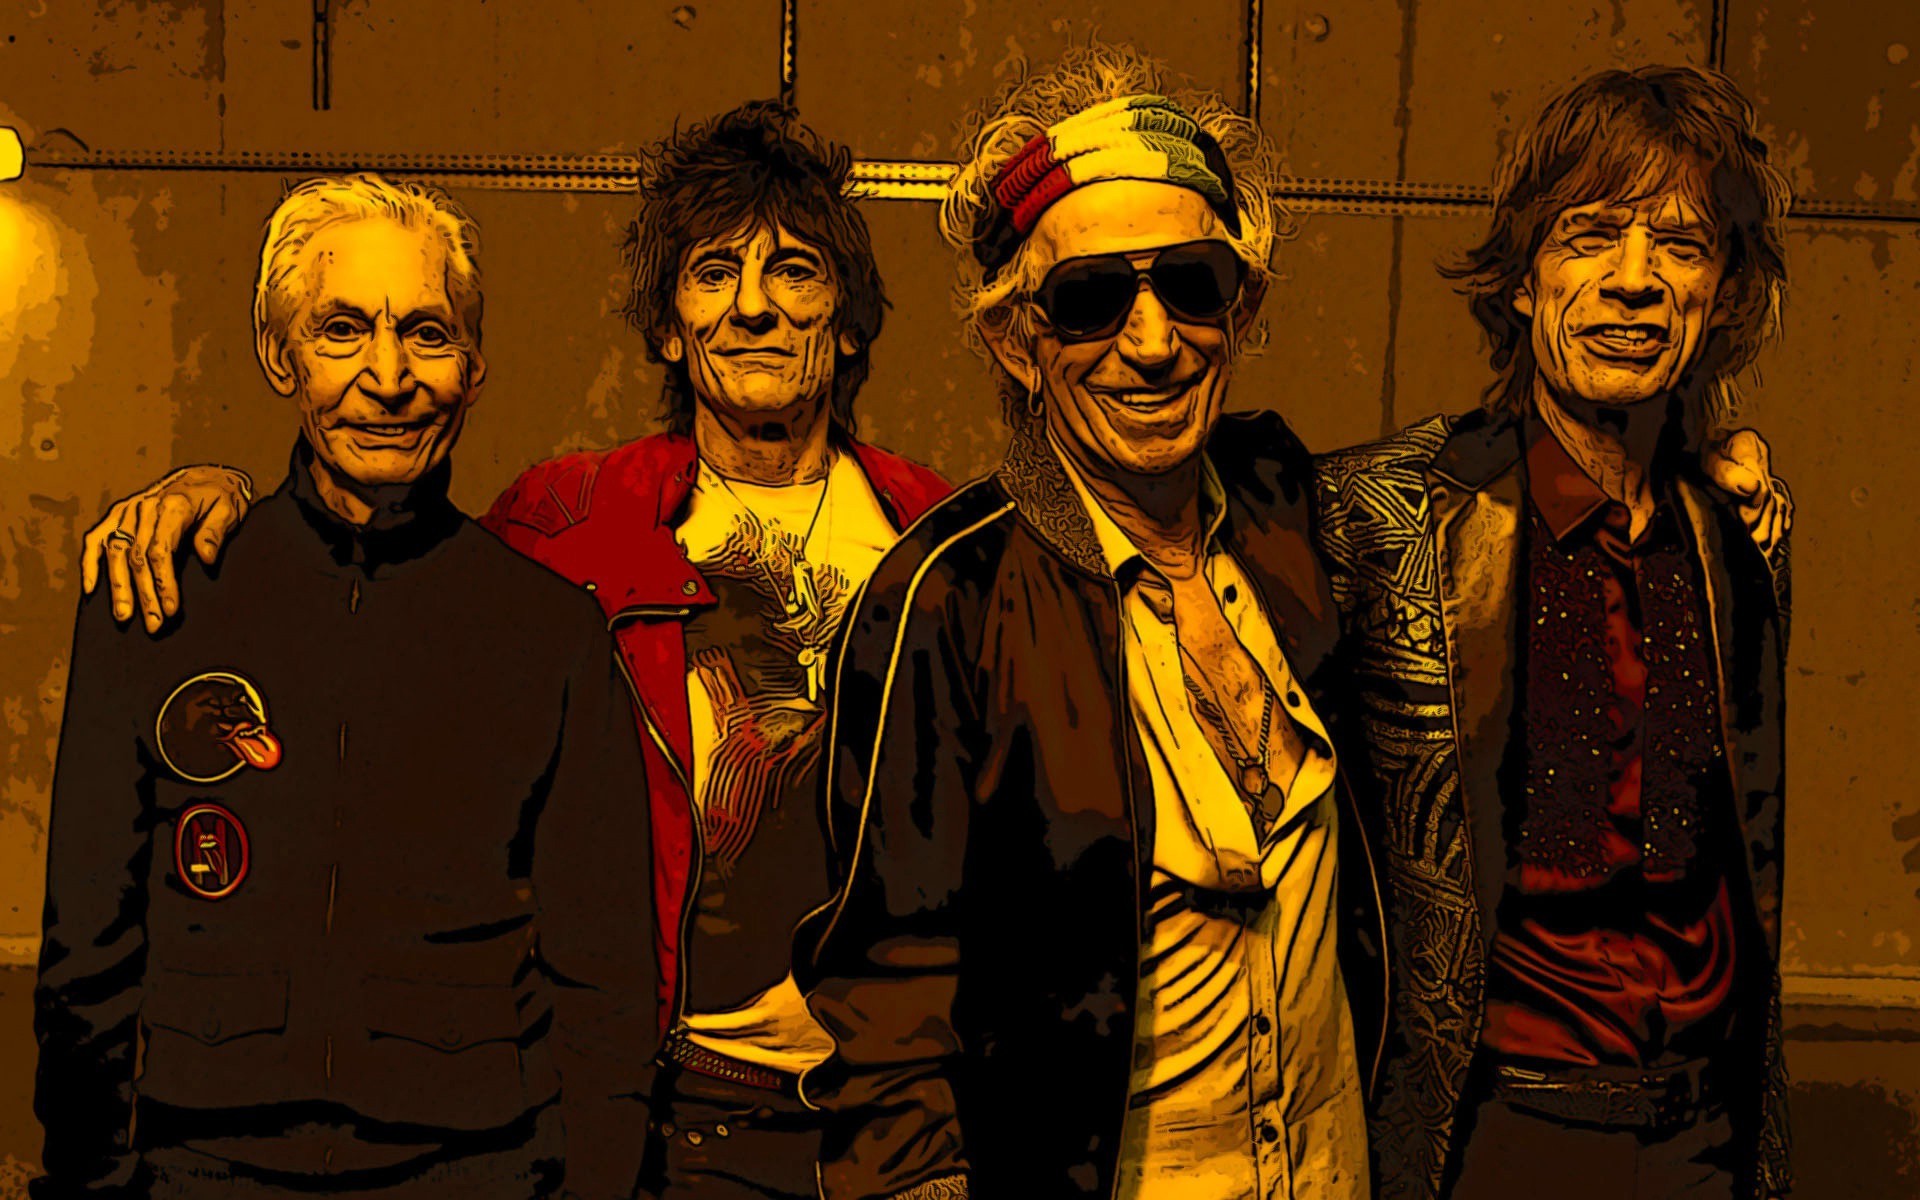 rolling stones wallpaper,social group,yellow,event,team,art